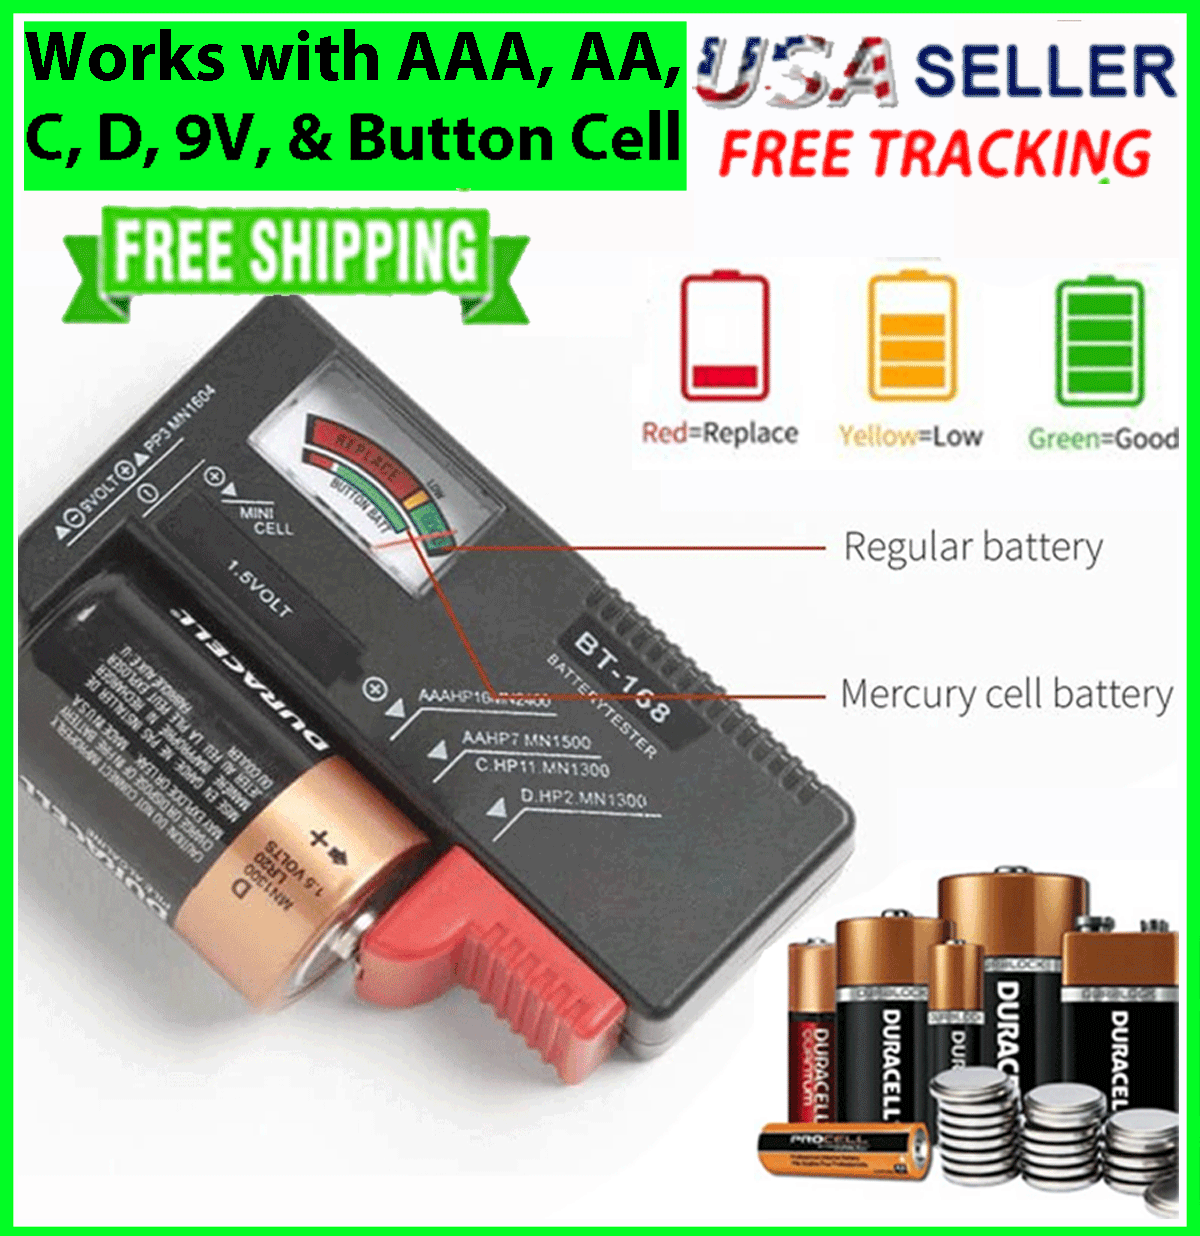 Battery Tester Checker Universal For Aa Aaa C D 9v 1.5v Button Cell Batteries Us